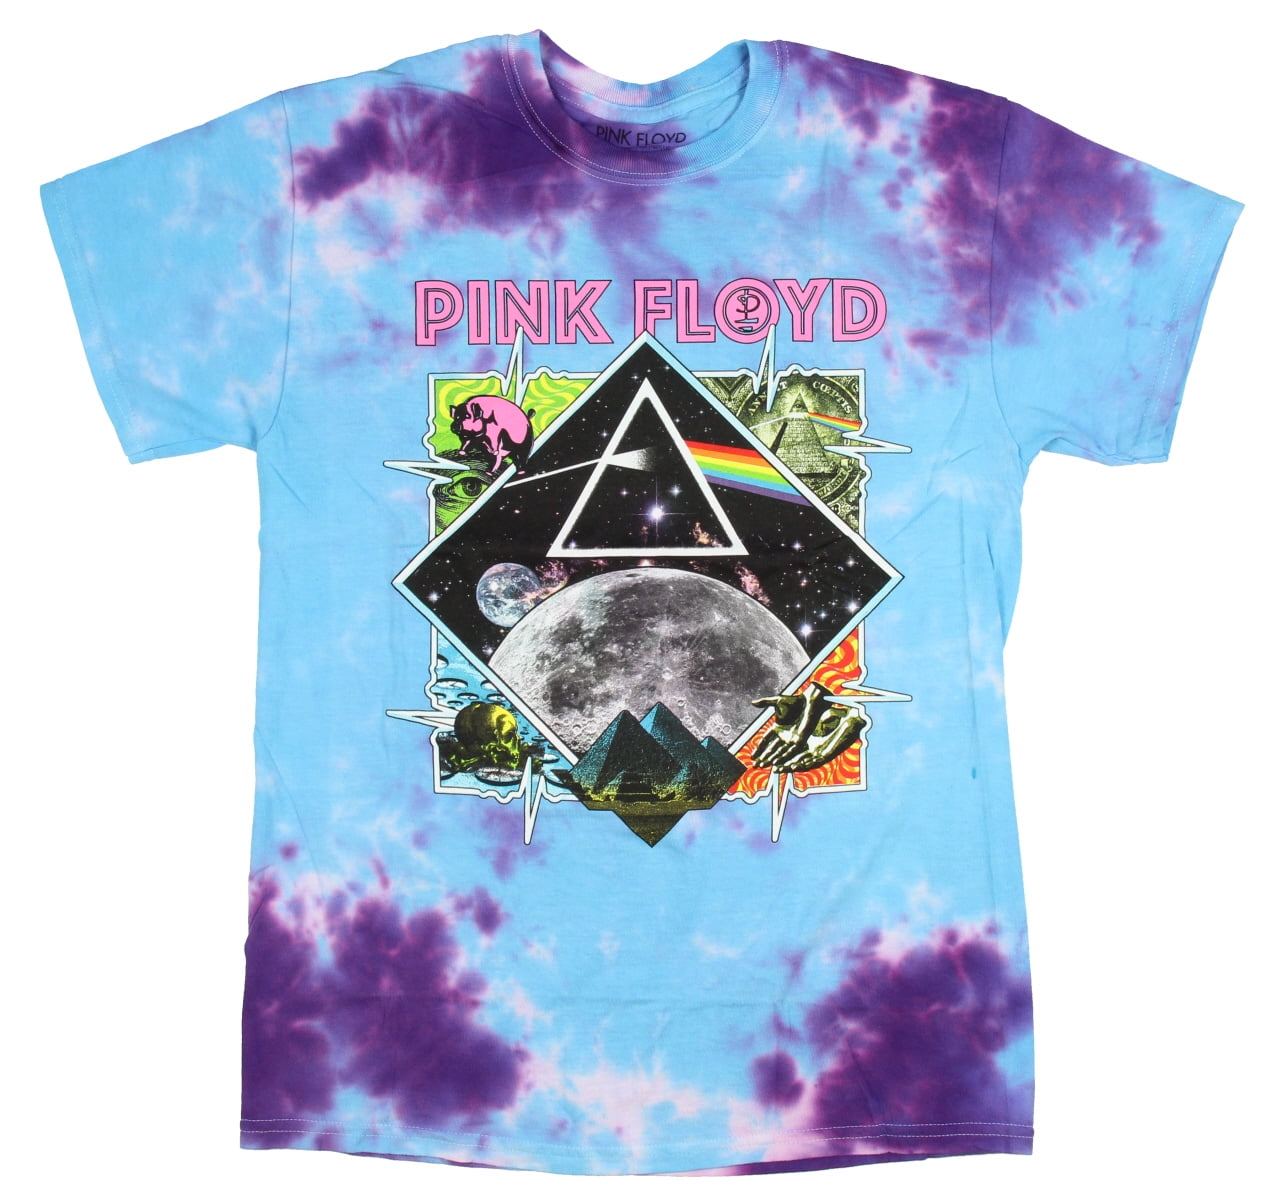 PINK FLOYD T-SHIRT DARK SIDE OF THE MOON CLASSIC TIE DYE BEST Adult SIzes S...